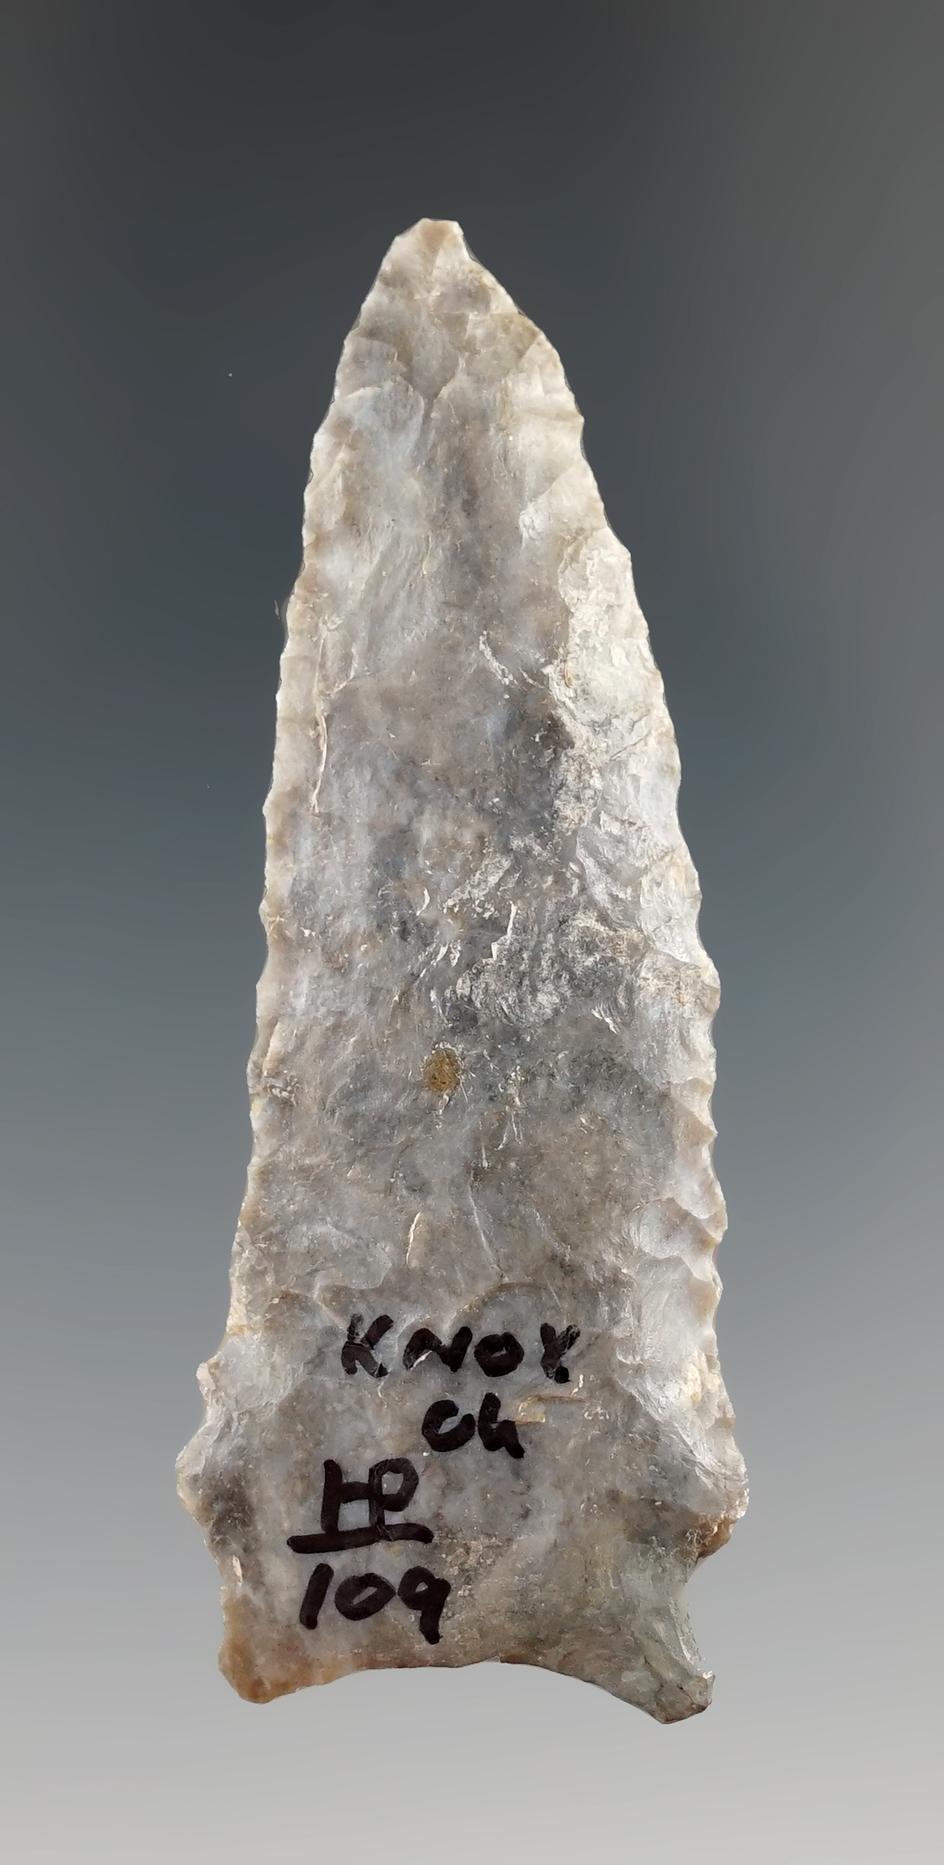 2 3/4" Meadowood Knife found in Knox Co., Ohio.